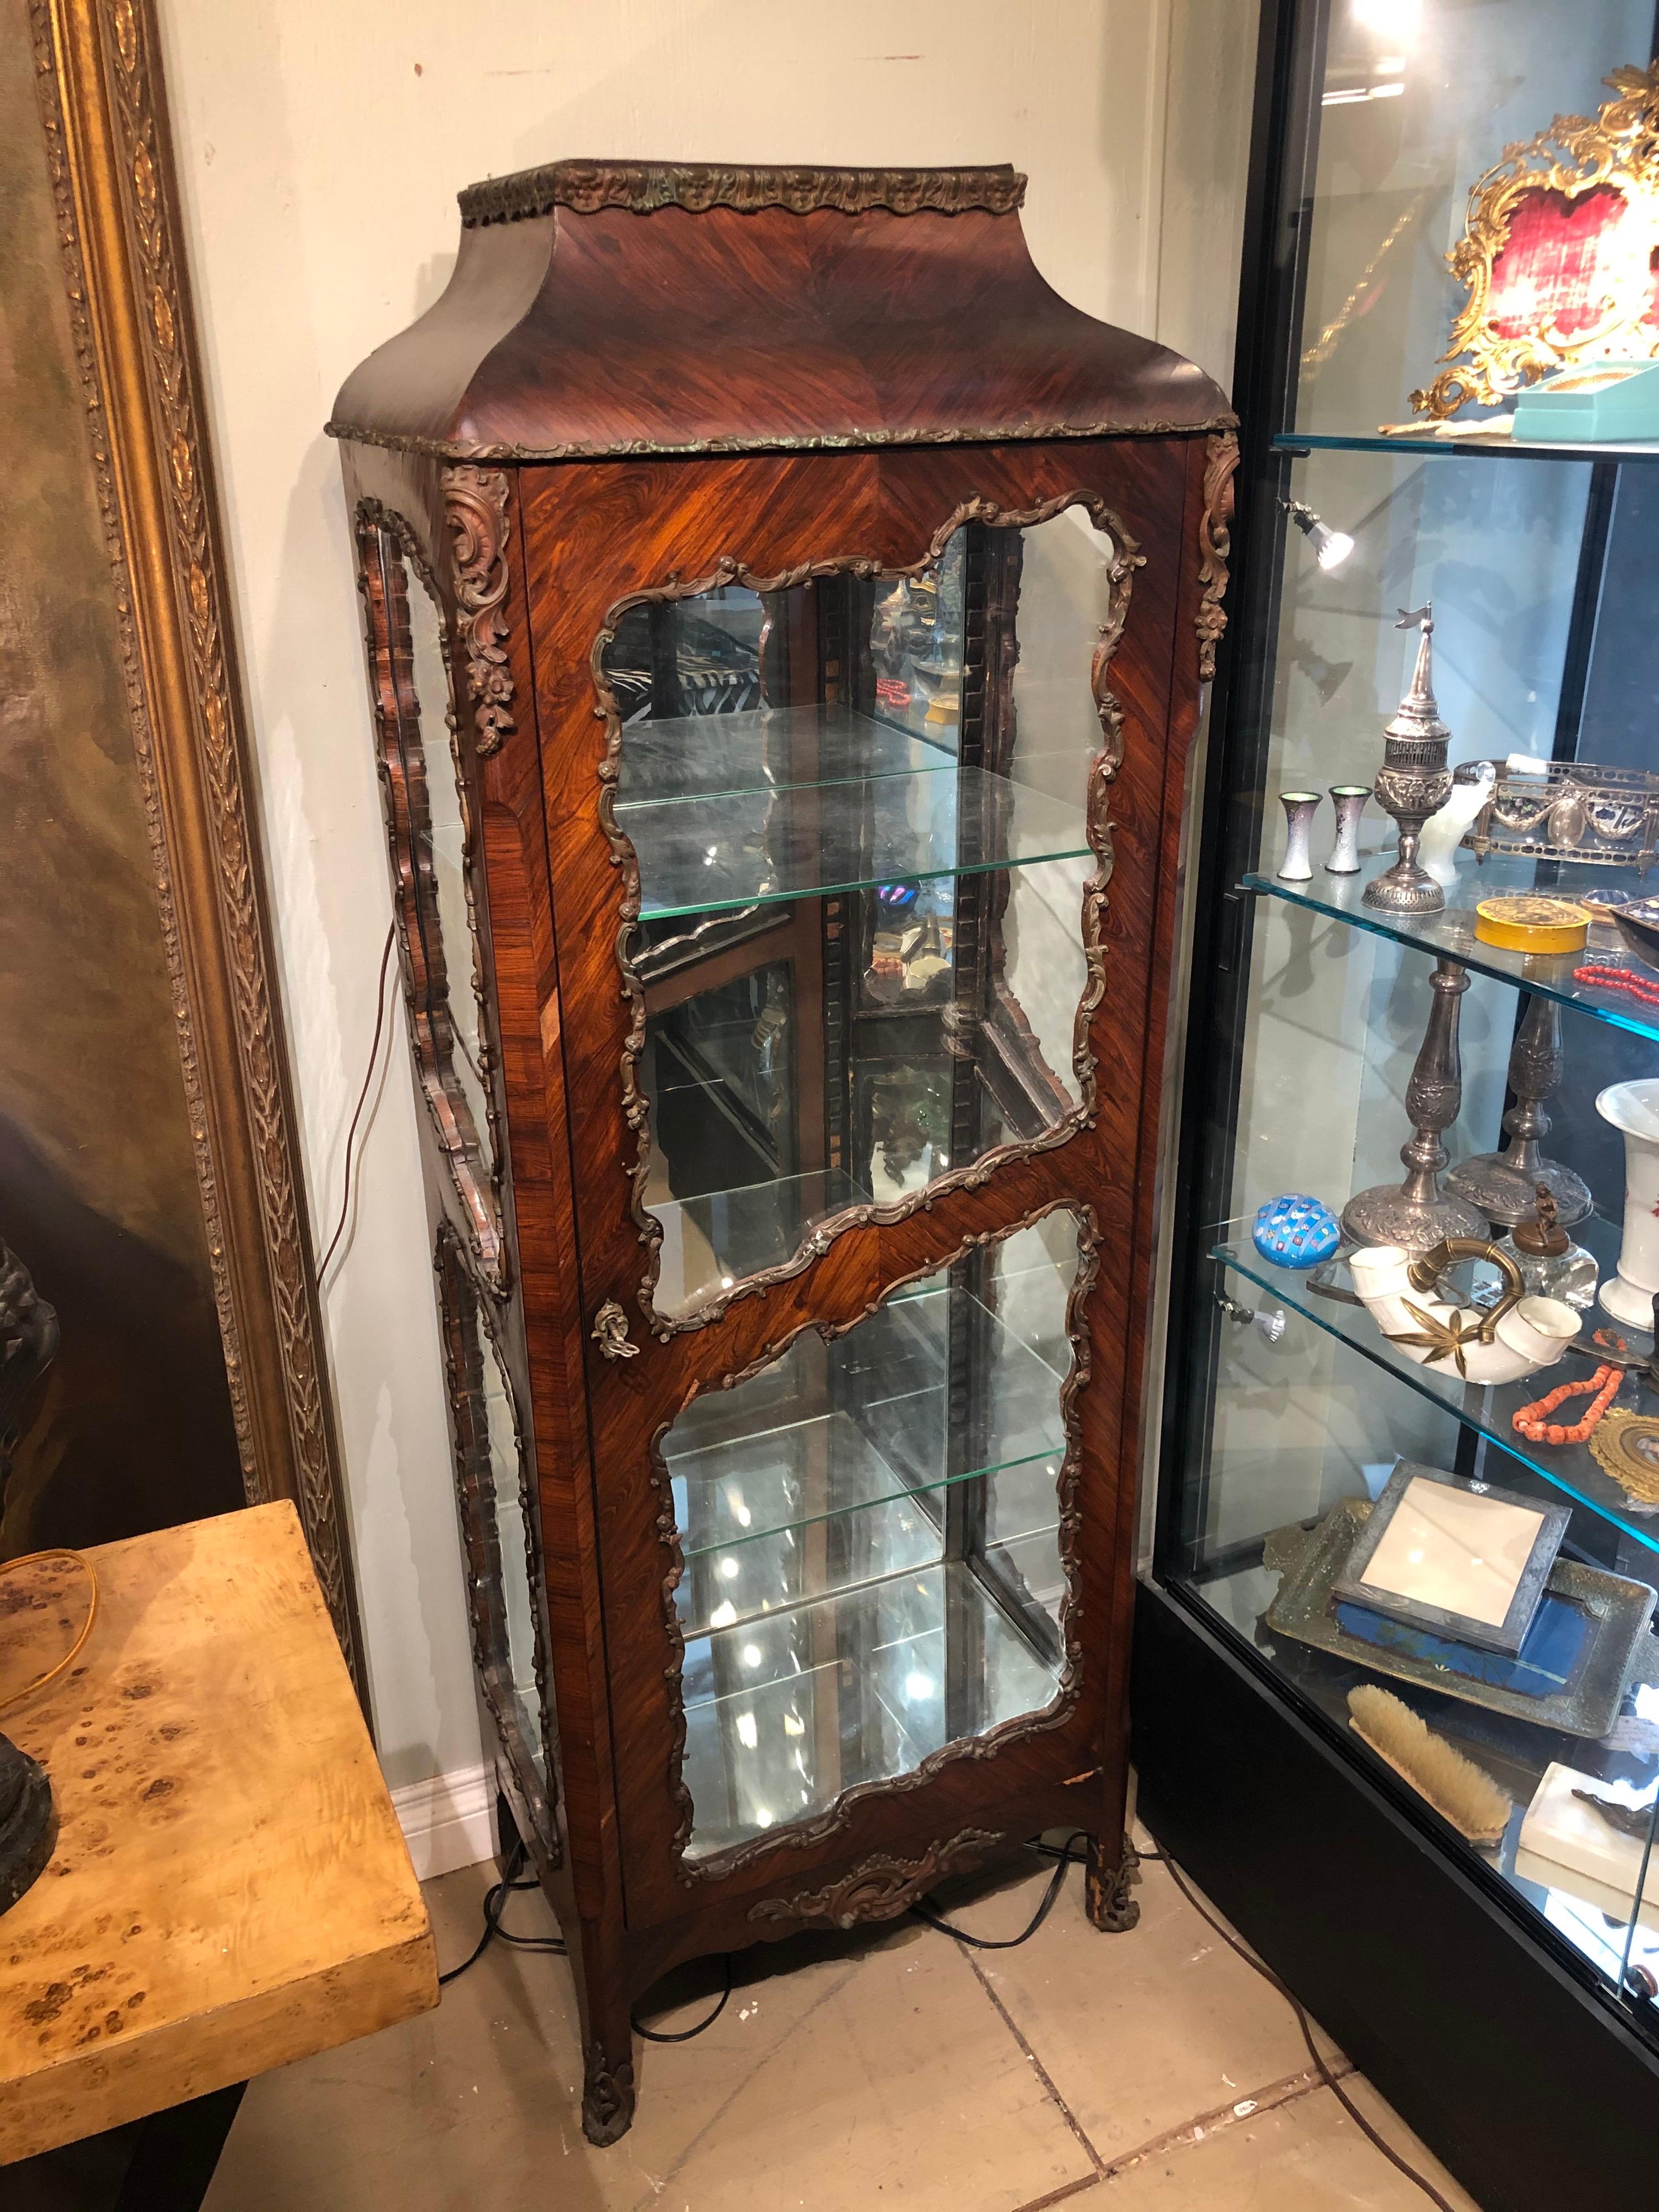 Circa 1900 French bronze mounted mahogany vitrine, In the Louis XVI style, with 3 sides of glass panels and the original lock and key. The electrics has been updated and the interior lamp works perfectly.